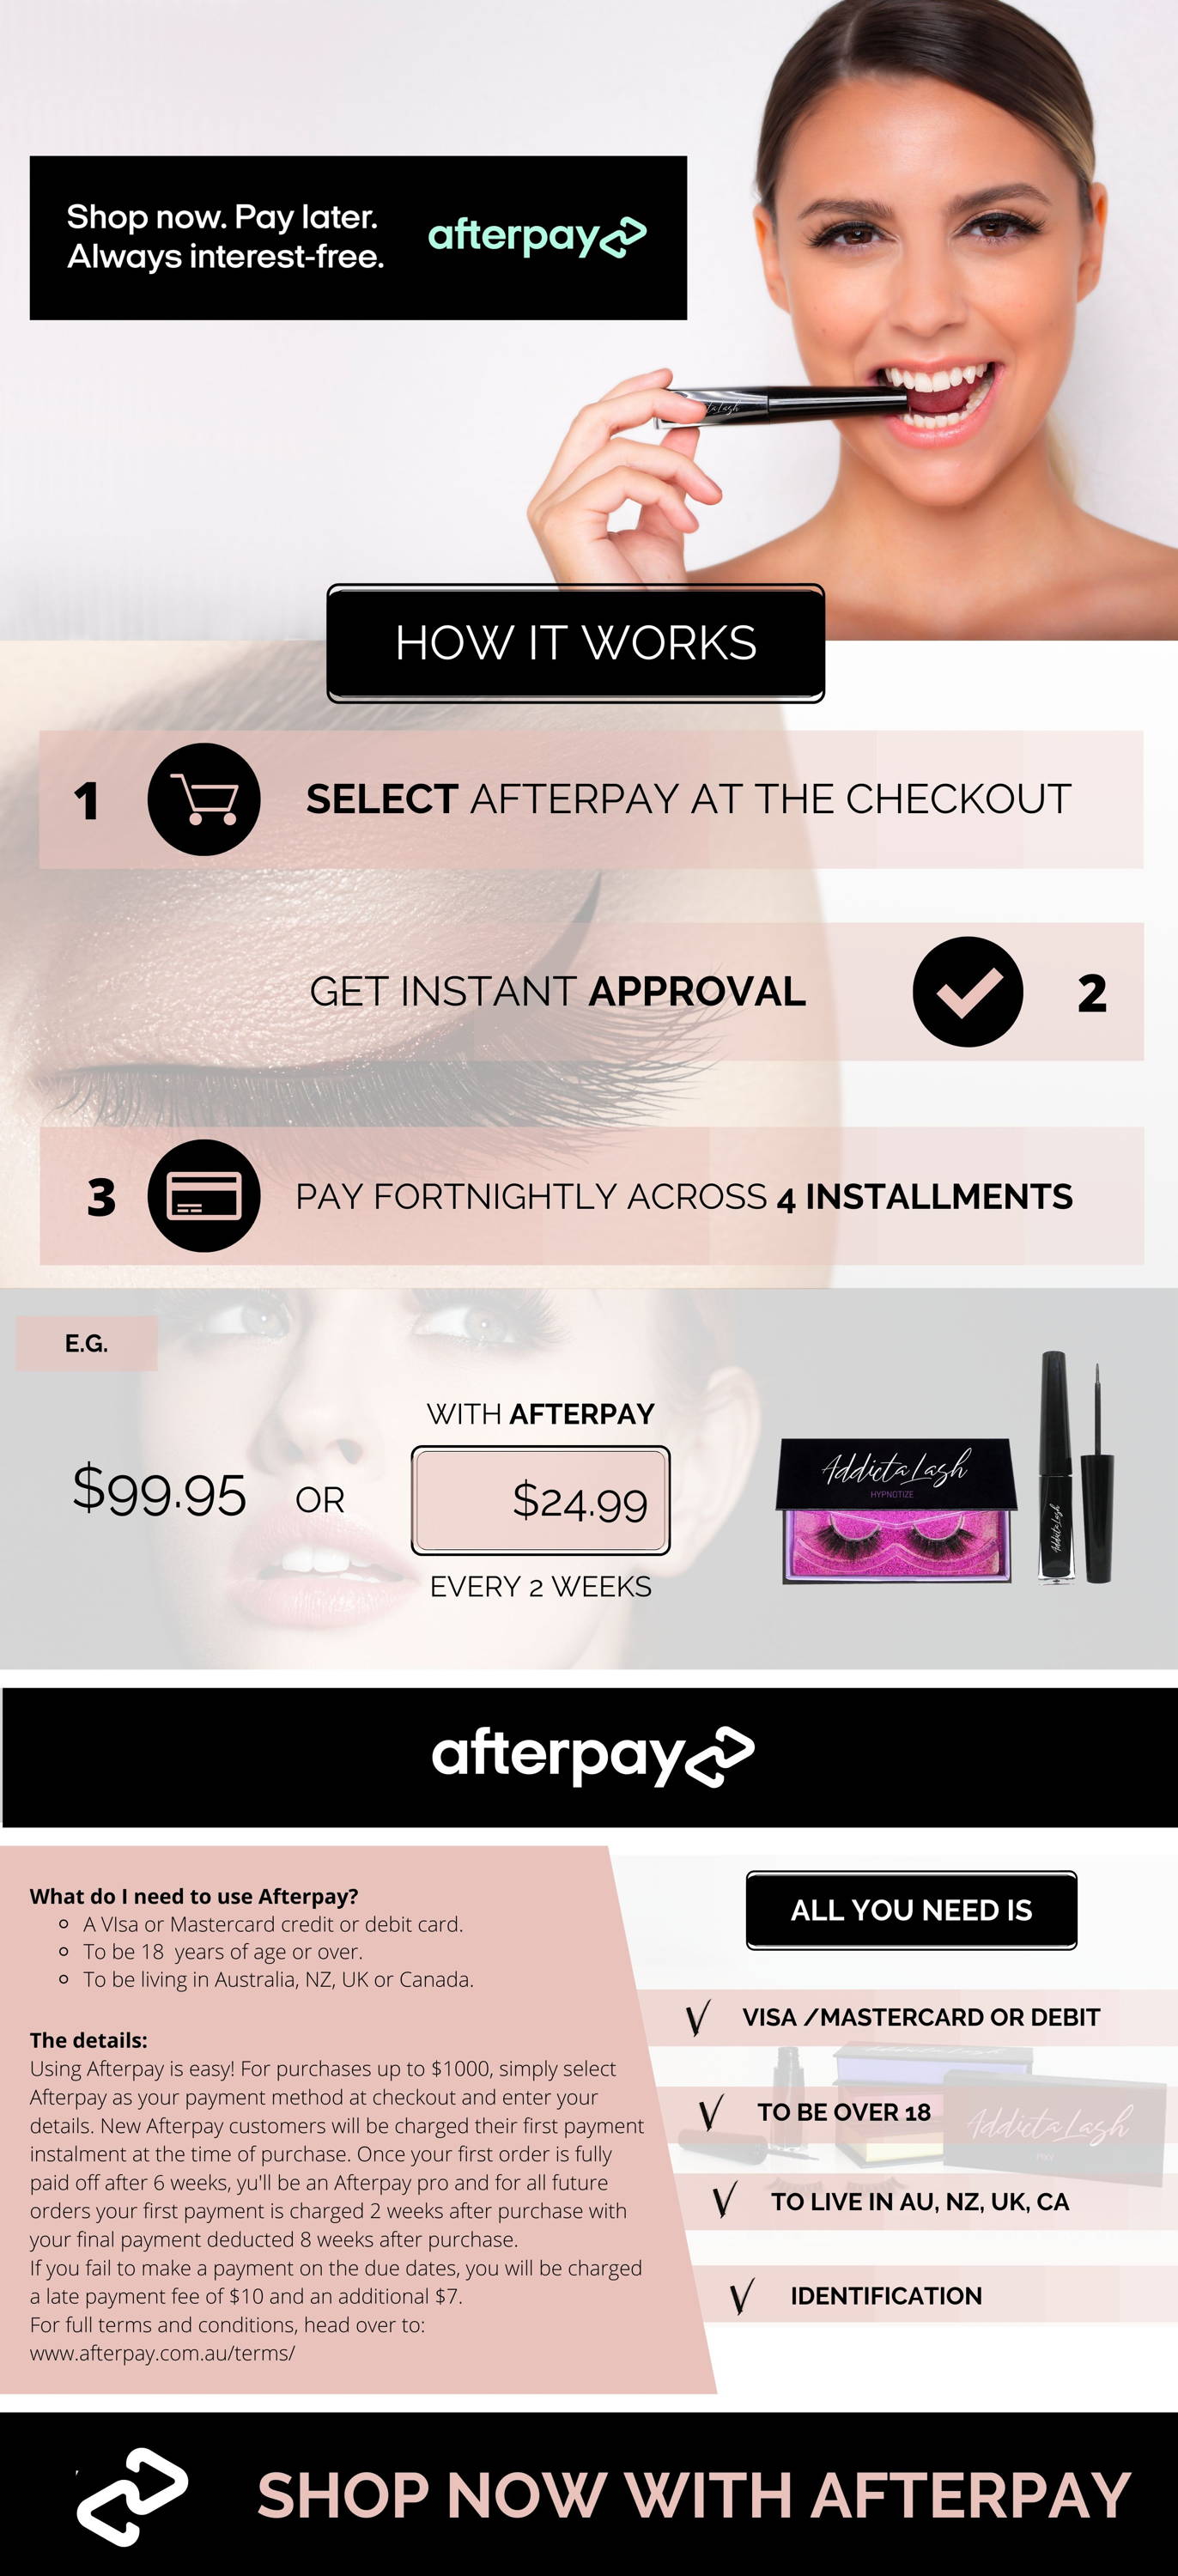 Tutorial showing how to use afterpay on addictalash website